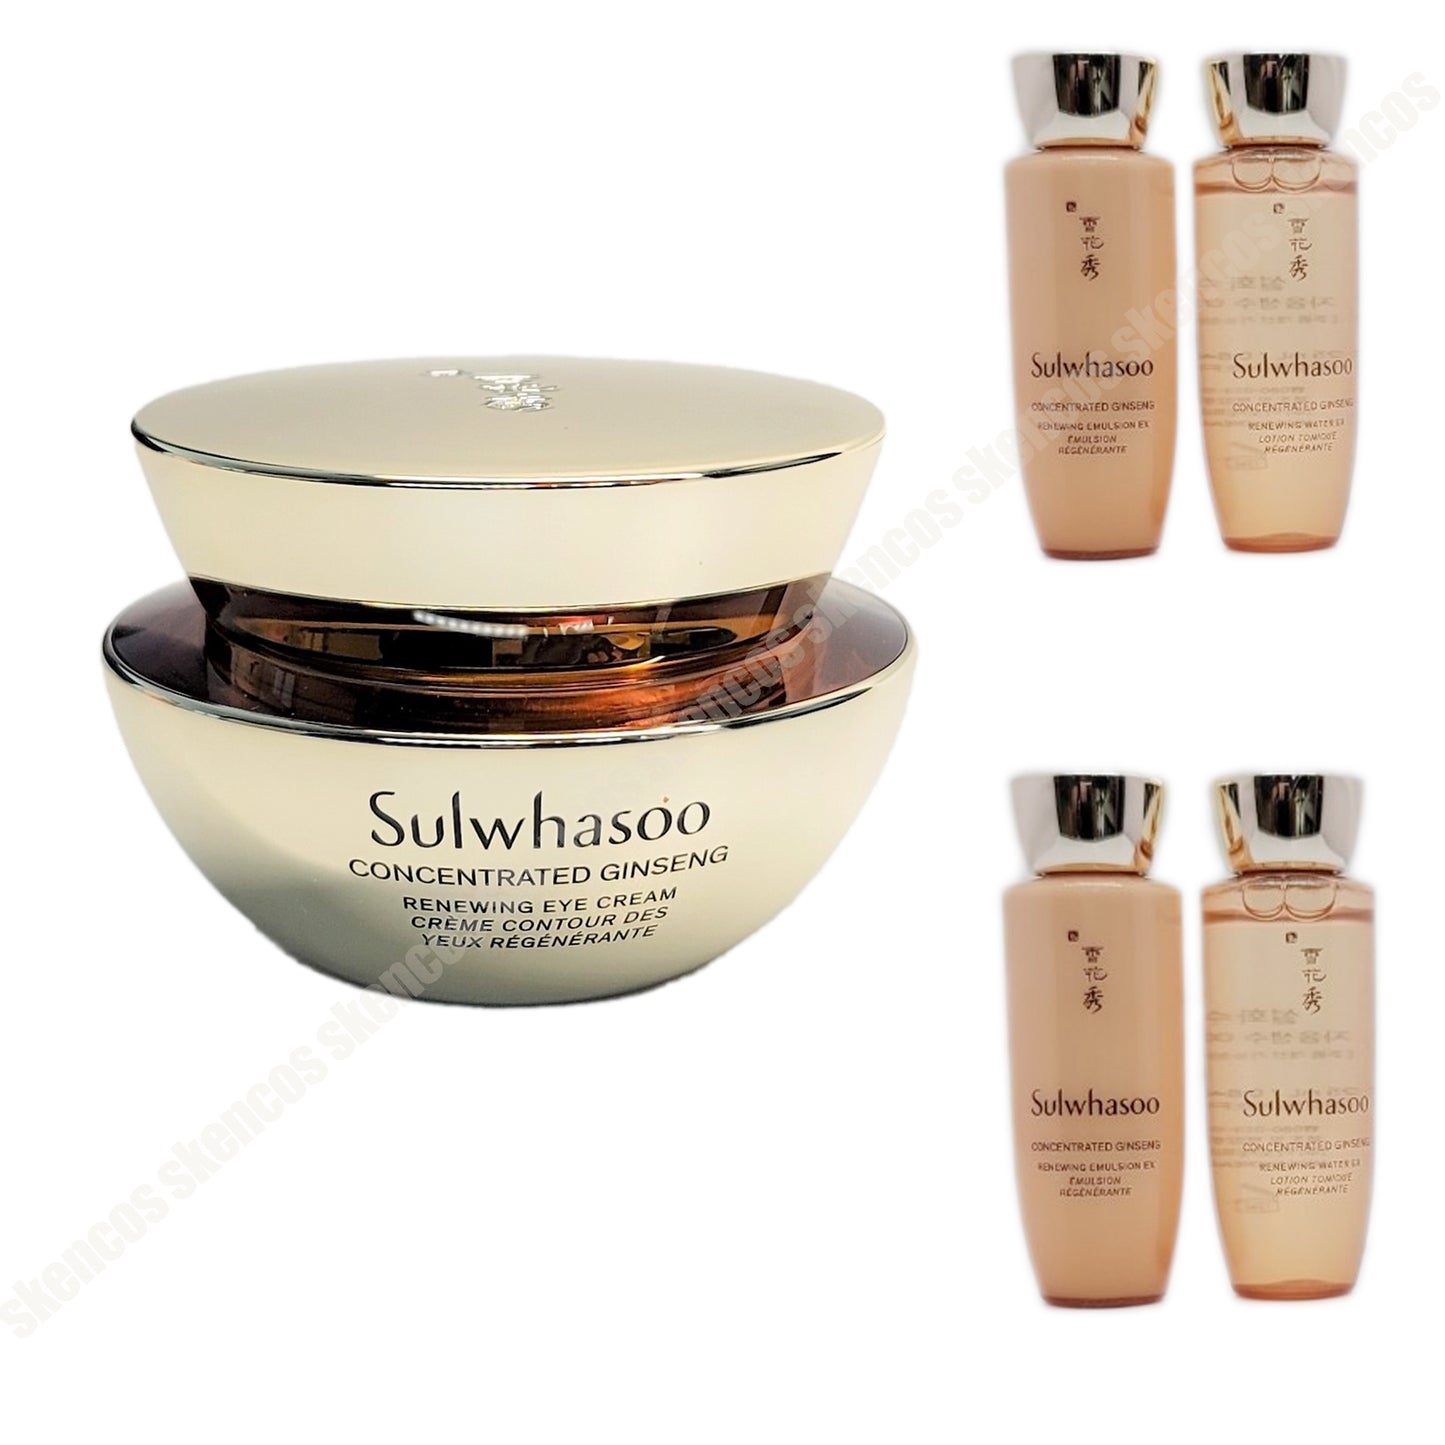 Sulwhasoo Concentrated Ginseng Renewing Eye Cream EX 20ml+4Kits/Toner2+Emulsion2